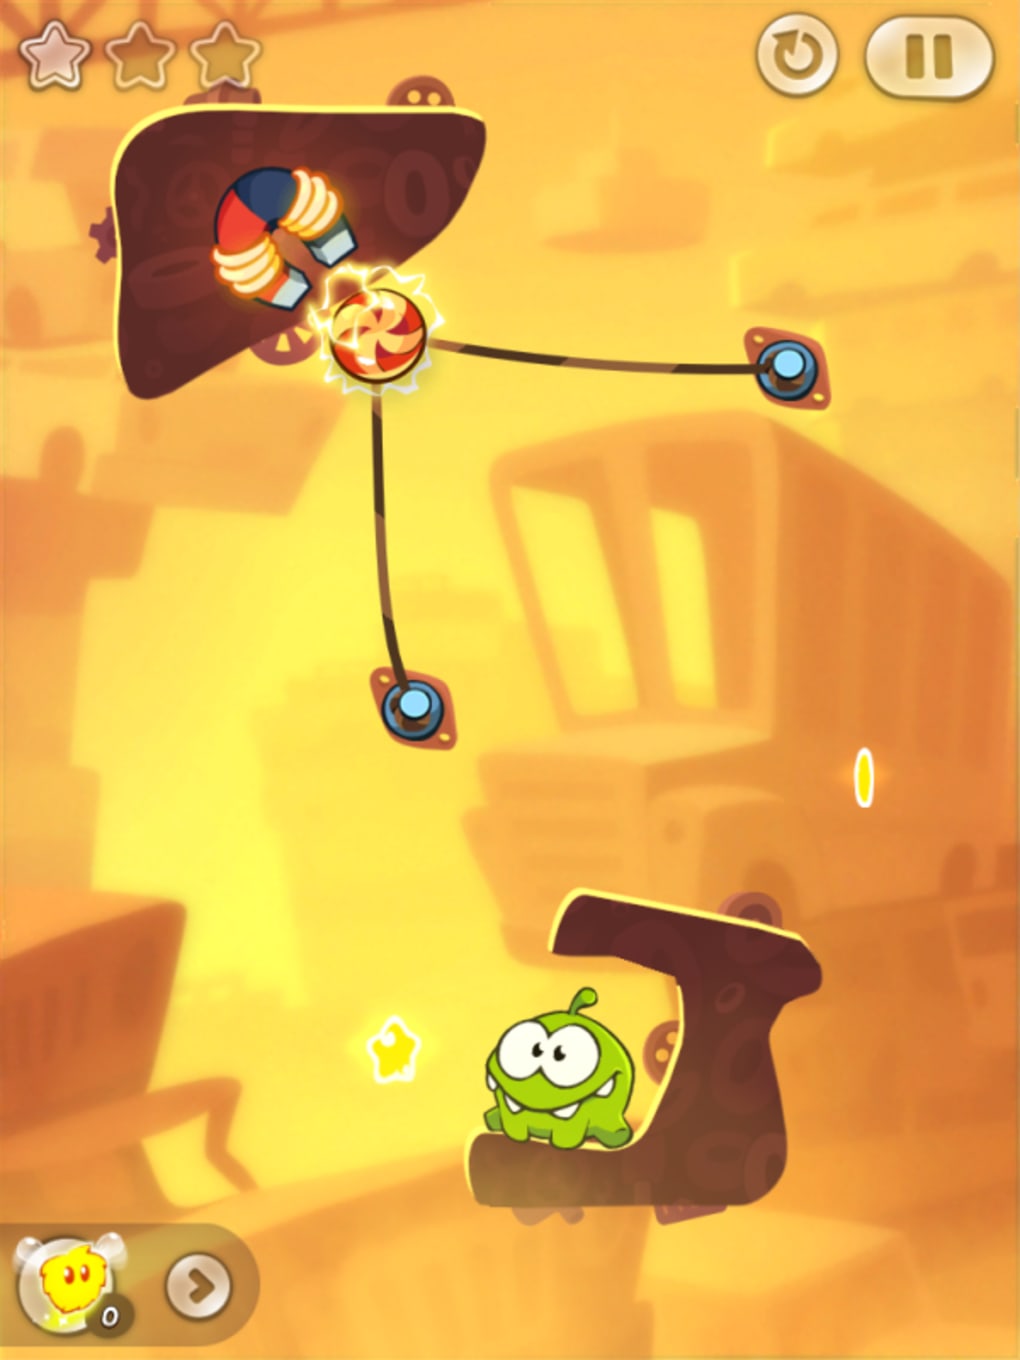 Cut The Rope 2 Coming To iOS This Month - Game Informer